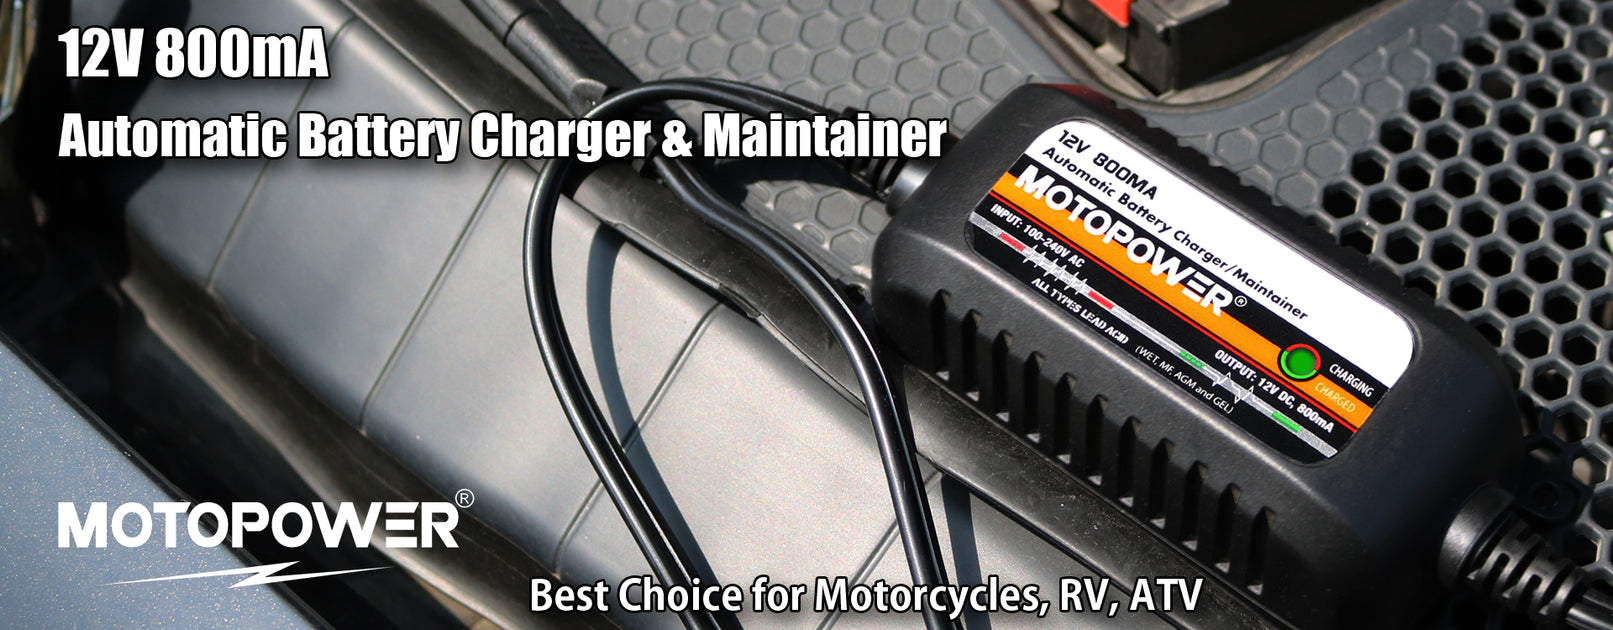 Motopower MOTOPOWER MP00205B 12V 1000mA Automatic Battery charger